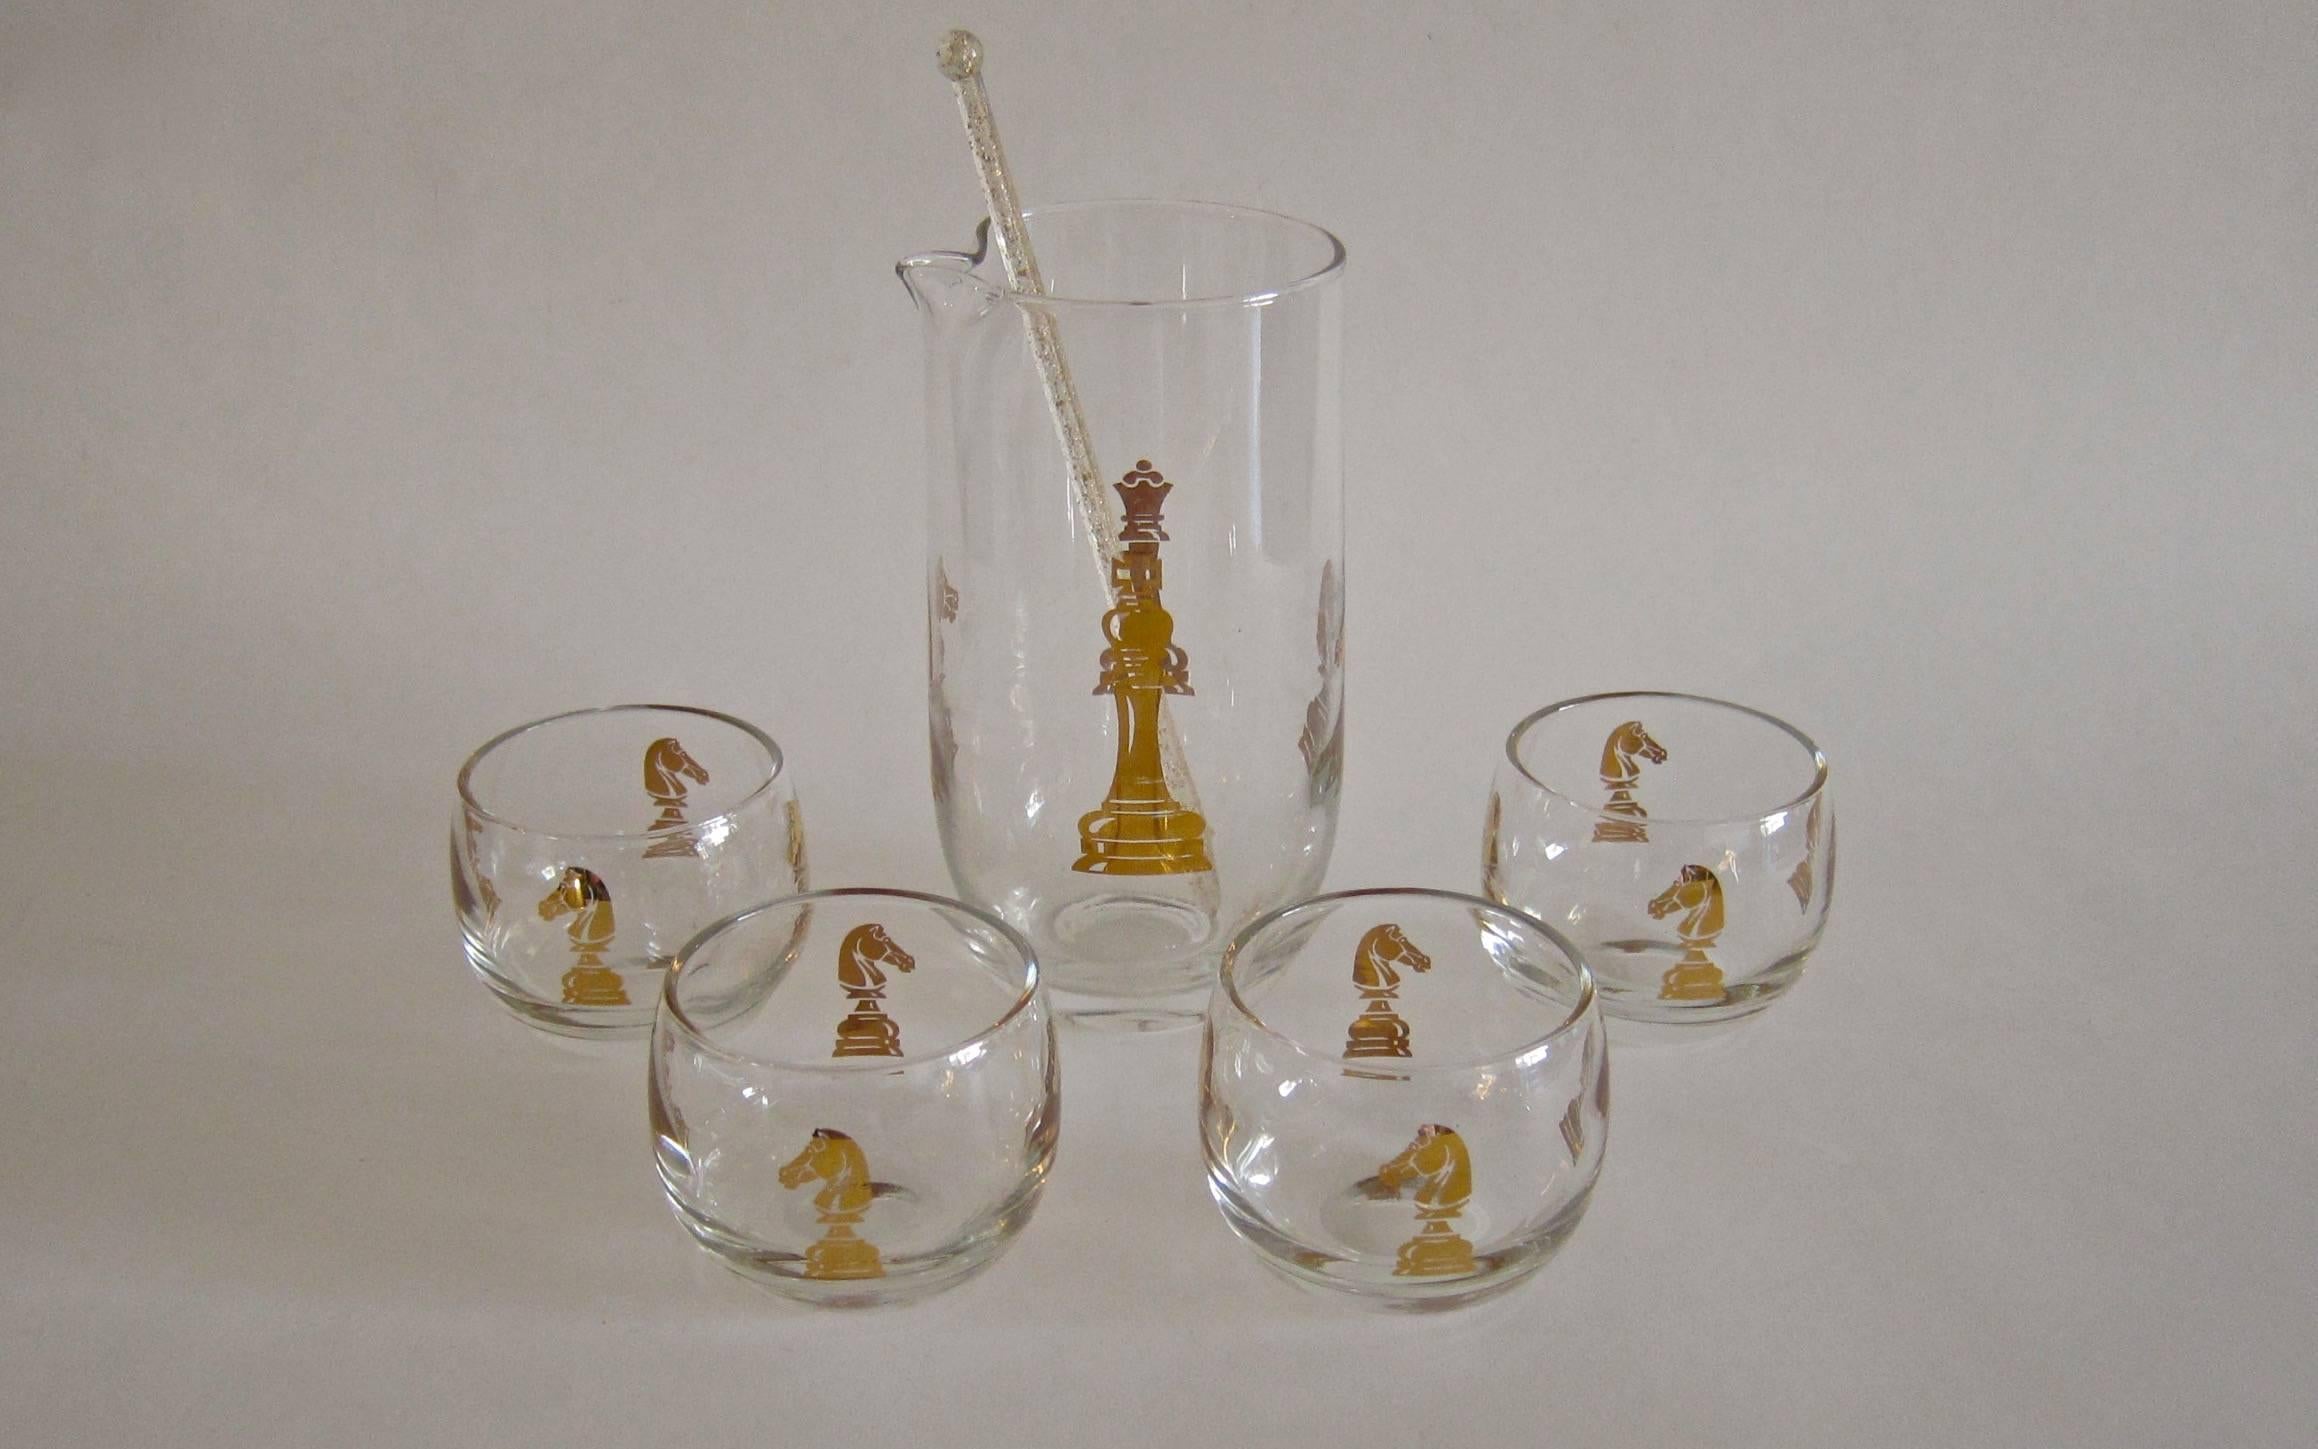 A chess-themed vintage glass cocktail set with original box comprised of six pieces: A pitcher decorated with a golden king, queen and knight, a stirrer and four matching roly poly glasses decorated with golden knights. The set was manufactured by